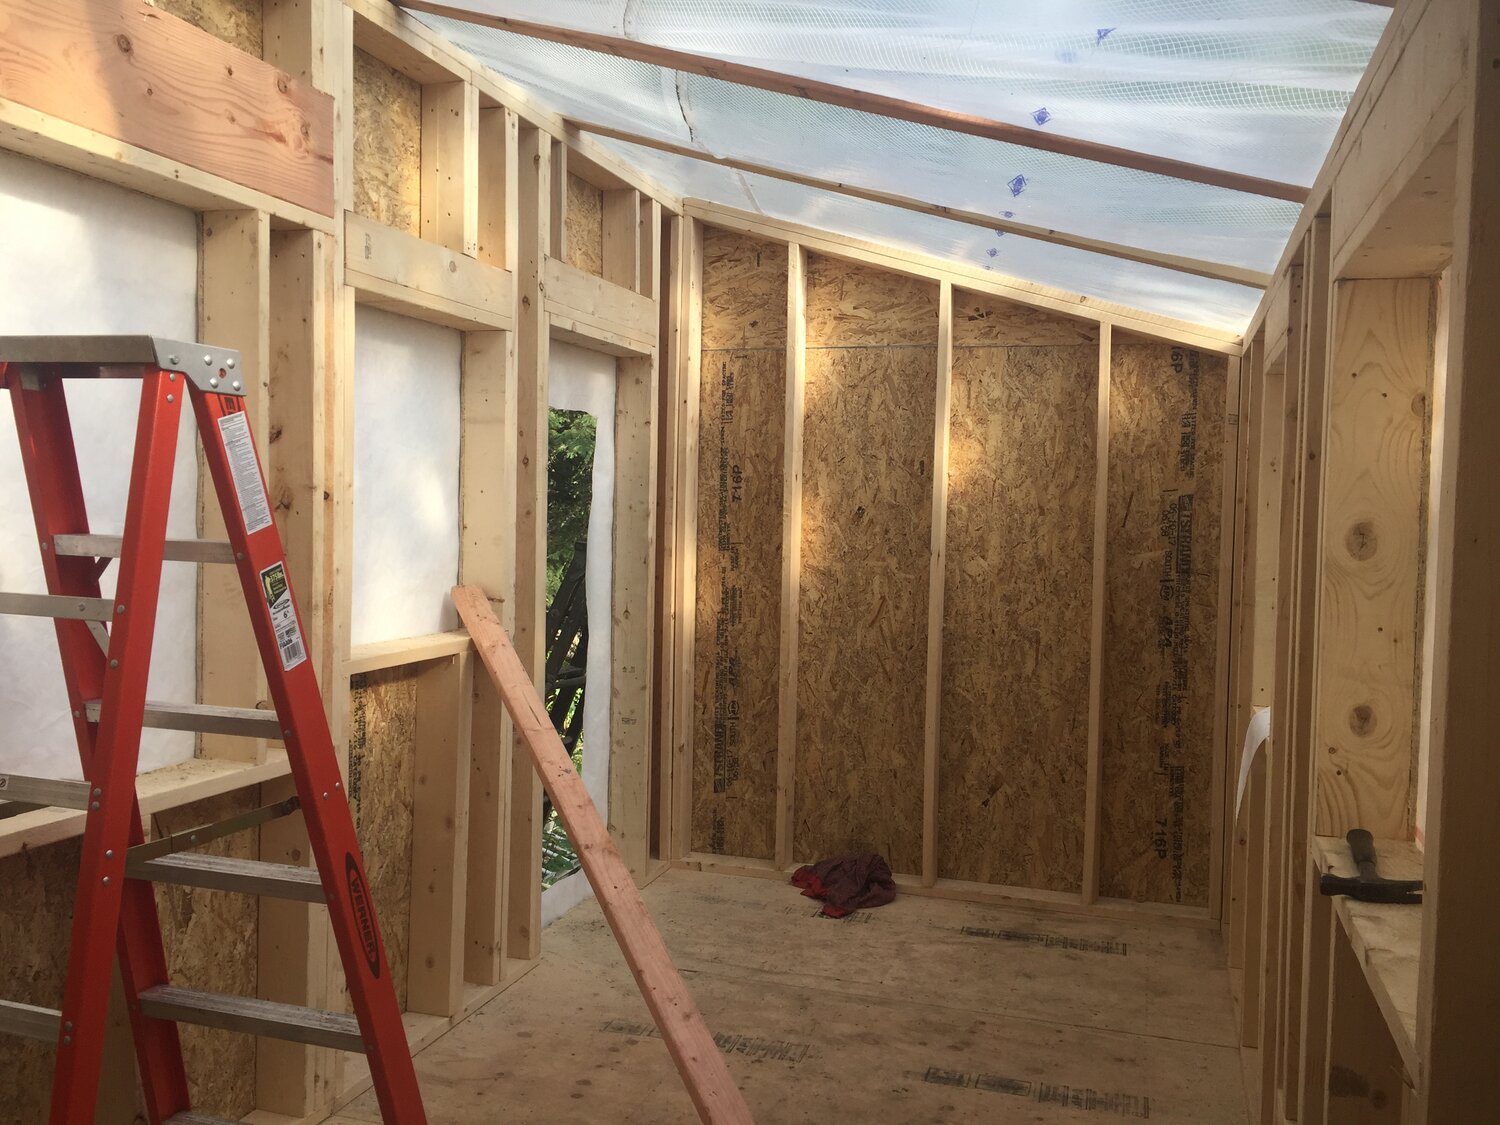 The interior of the tiny gallery is prepared for insulation and wiring, image courtesy of the artist